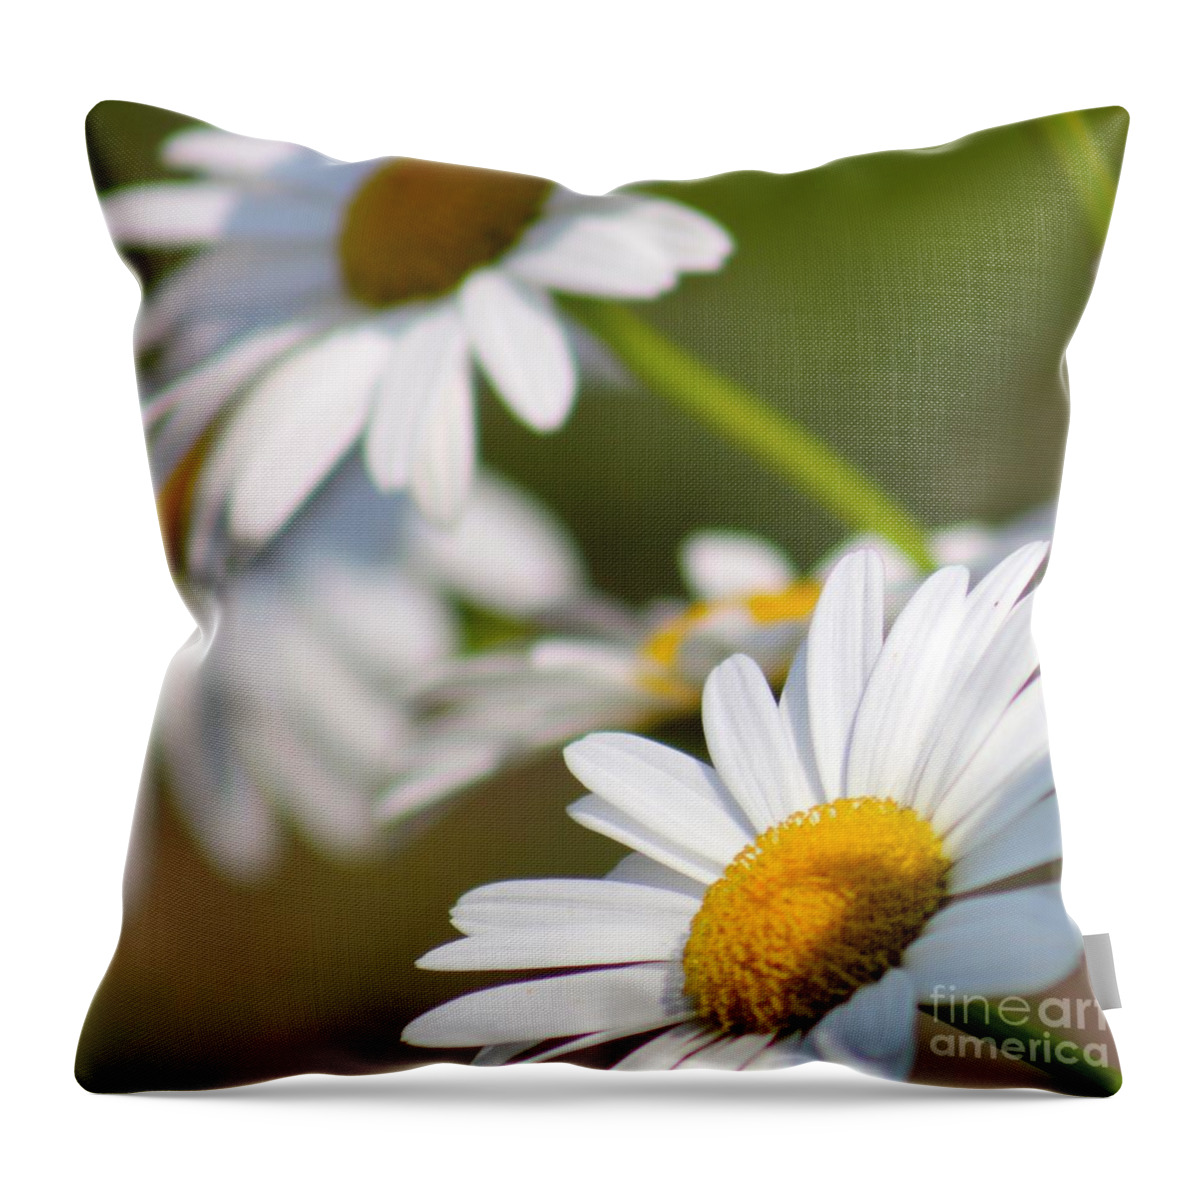 Yellow Throw Pillow featuring the photograph Nature's Beauty 58 by Deena Withycombe